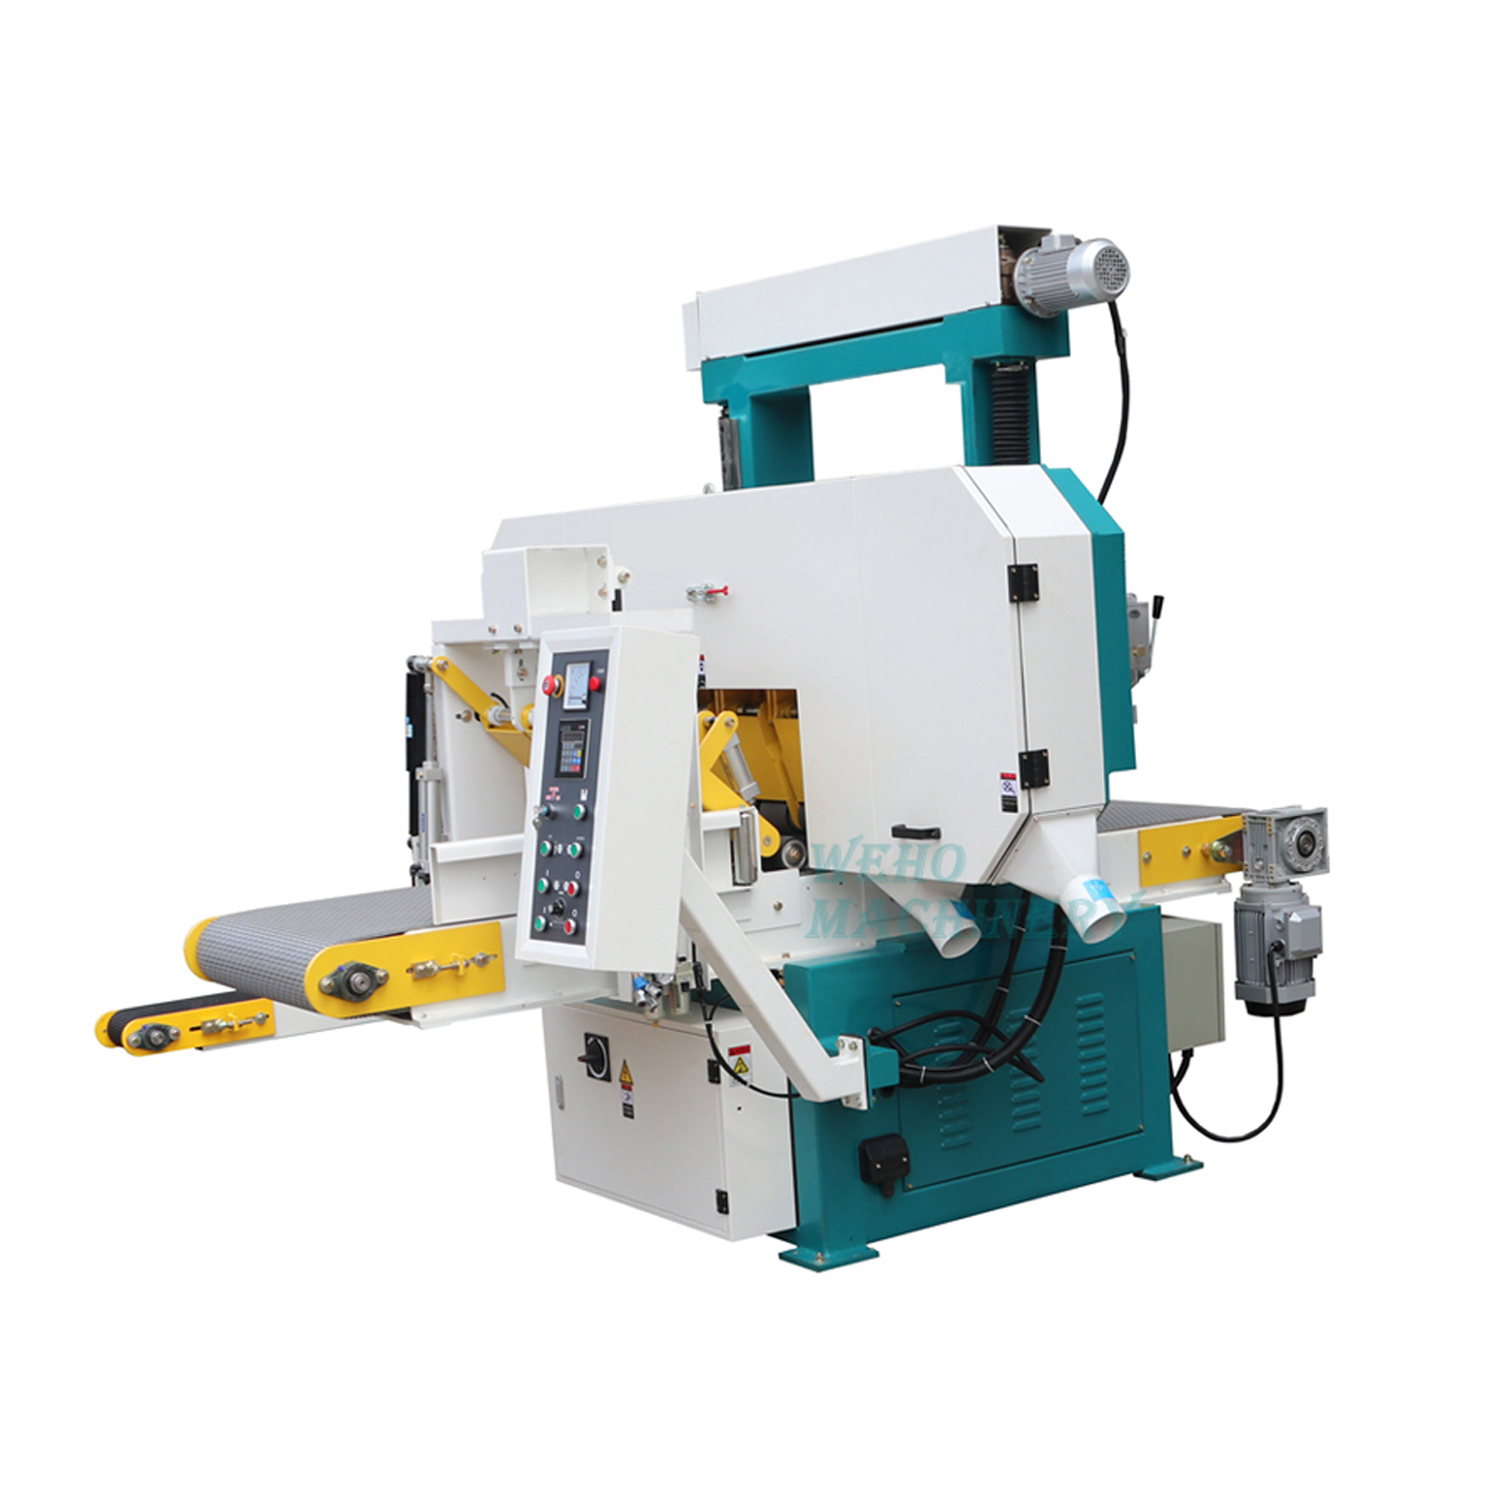 Horizontal Band Resaw with Return Table wood panel bandsaw thick material board cutting machine | Horizontal Wood Band Saw